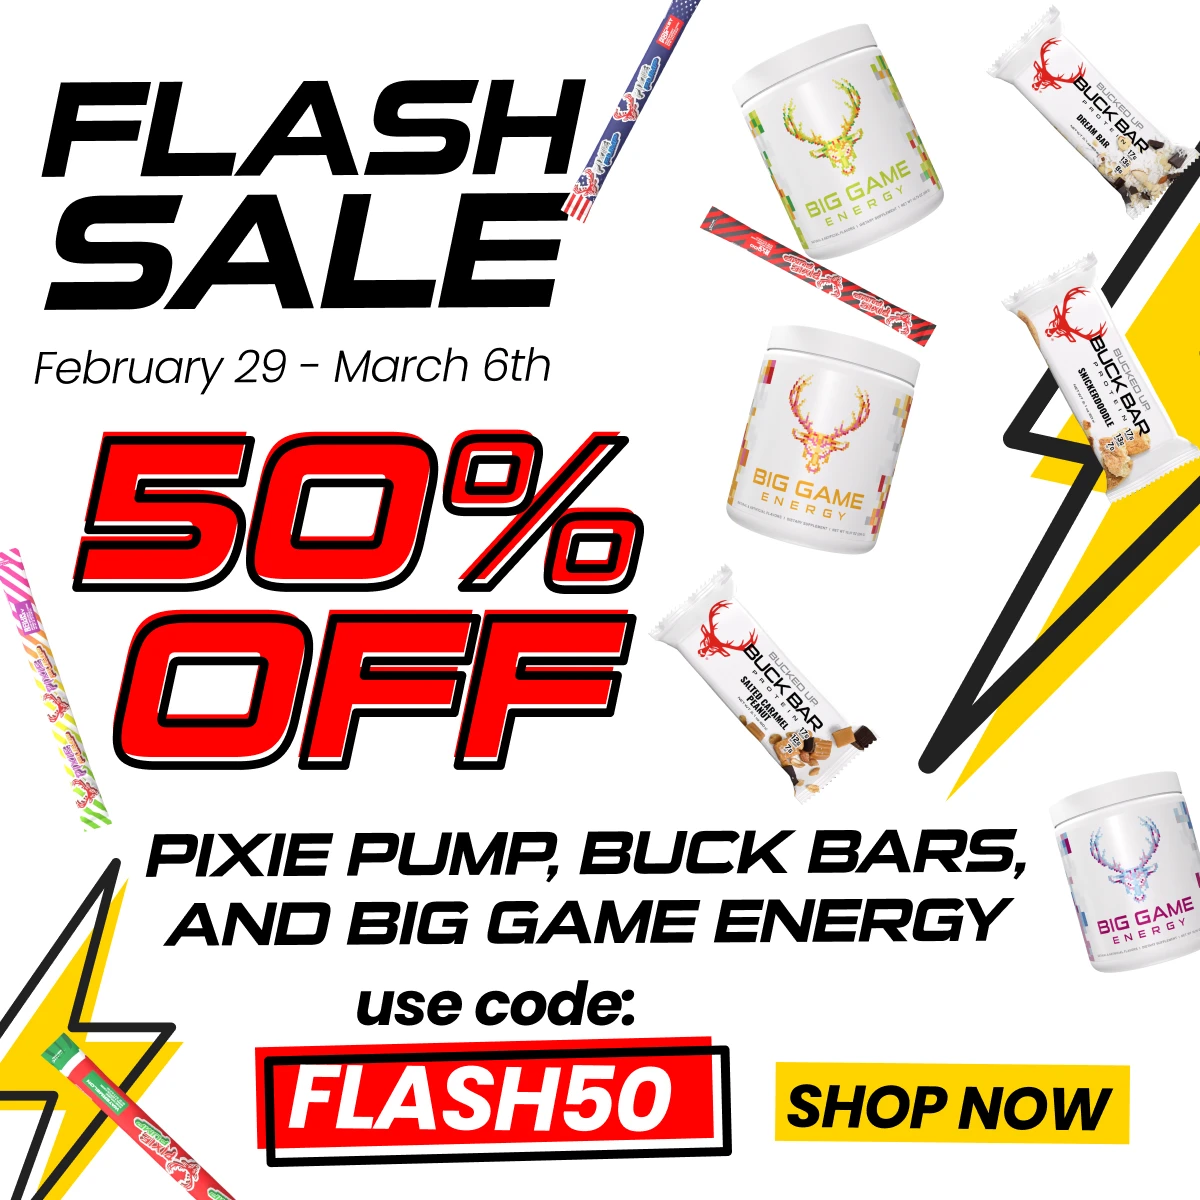 Flash Sale - Banner is of a flash sale that says "flash sale, February 29 - March 6th, 50% off, pixie pump, buck bars, and big game energy, use code: FLASH50, and shop now", with images of lightning, pixie pump, big game energy, and buck bars in